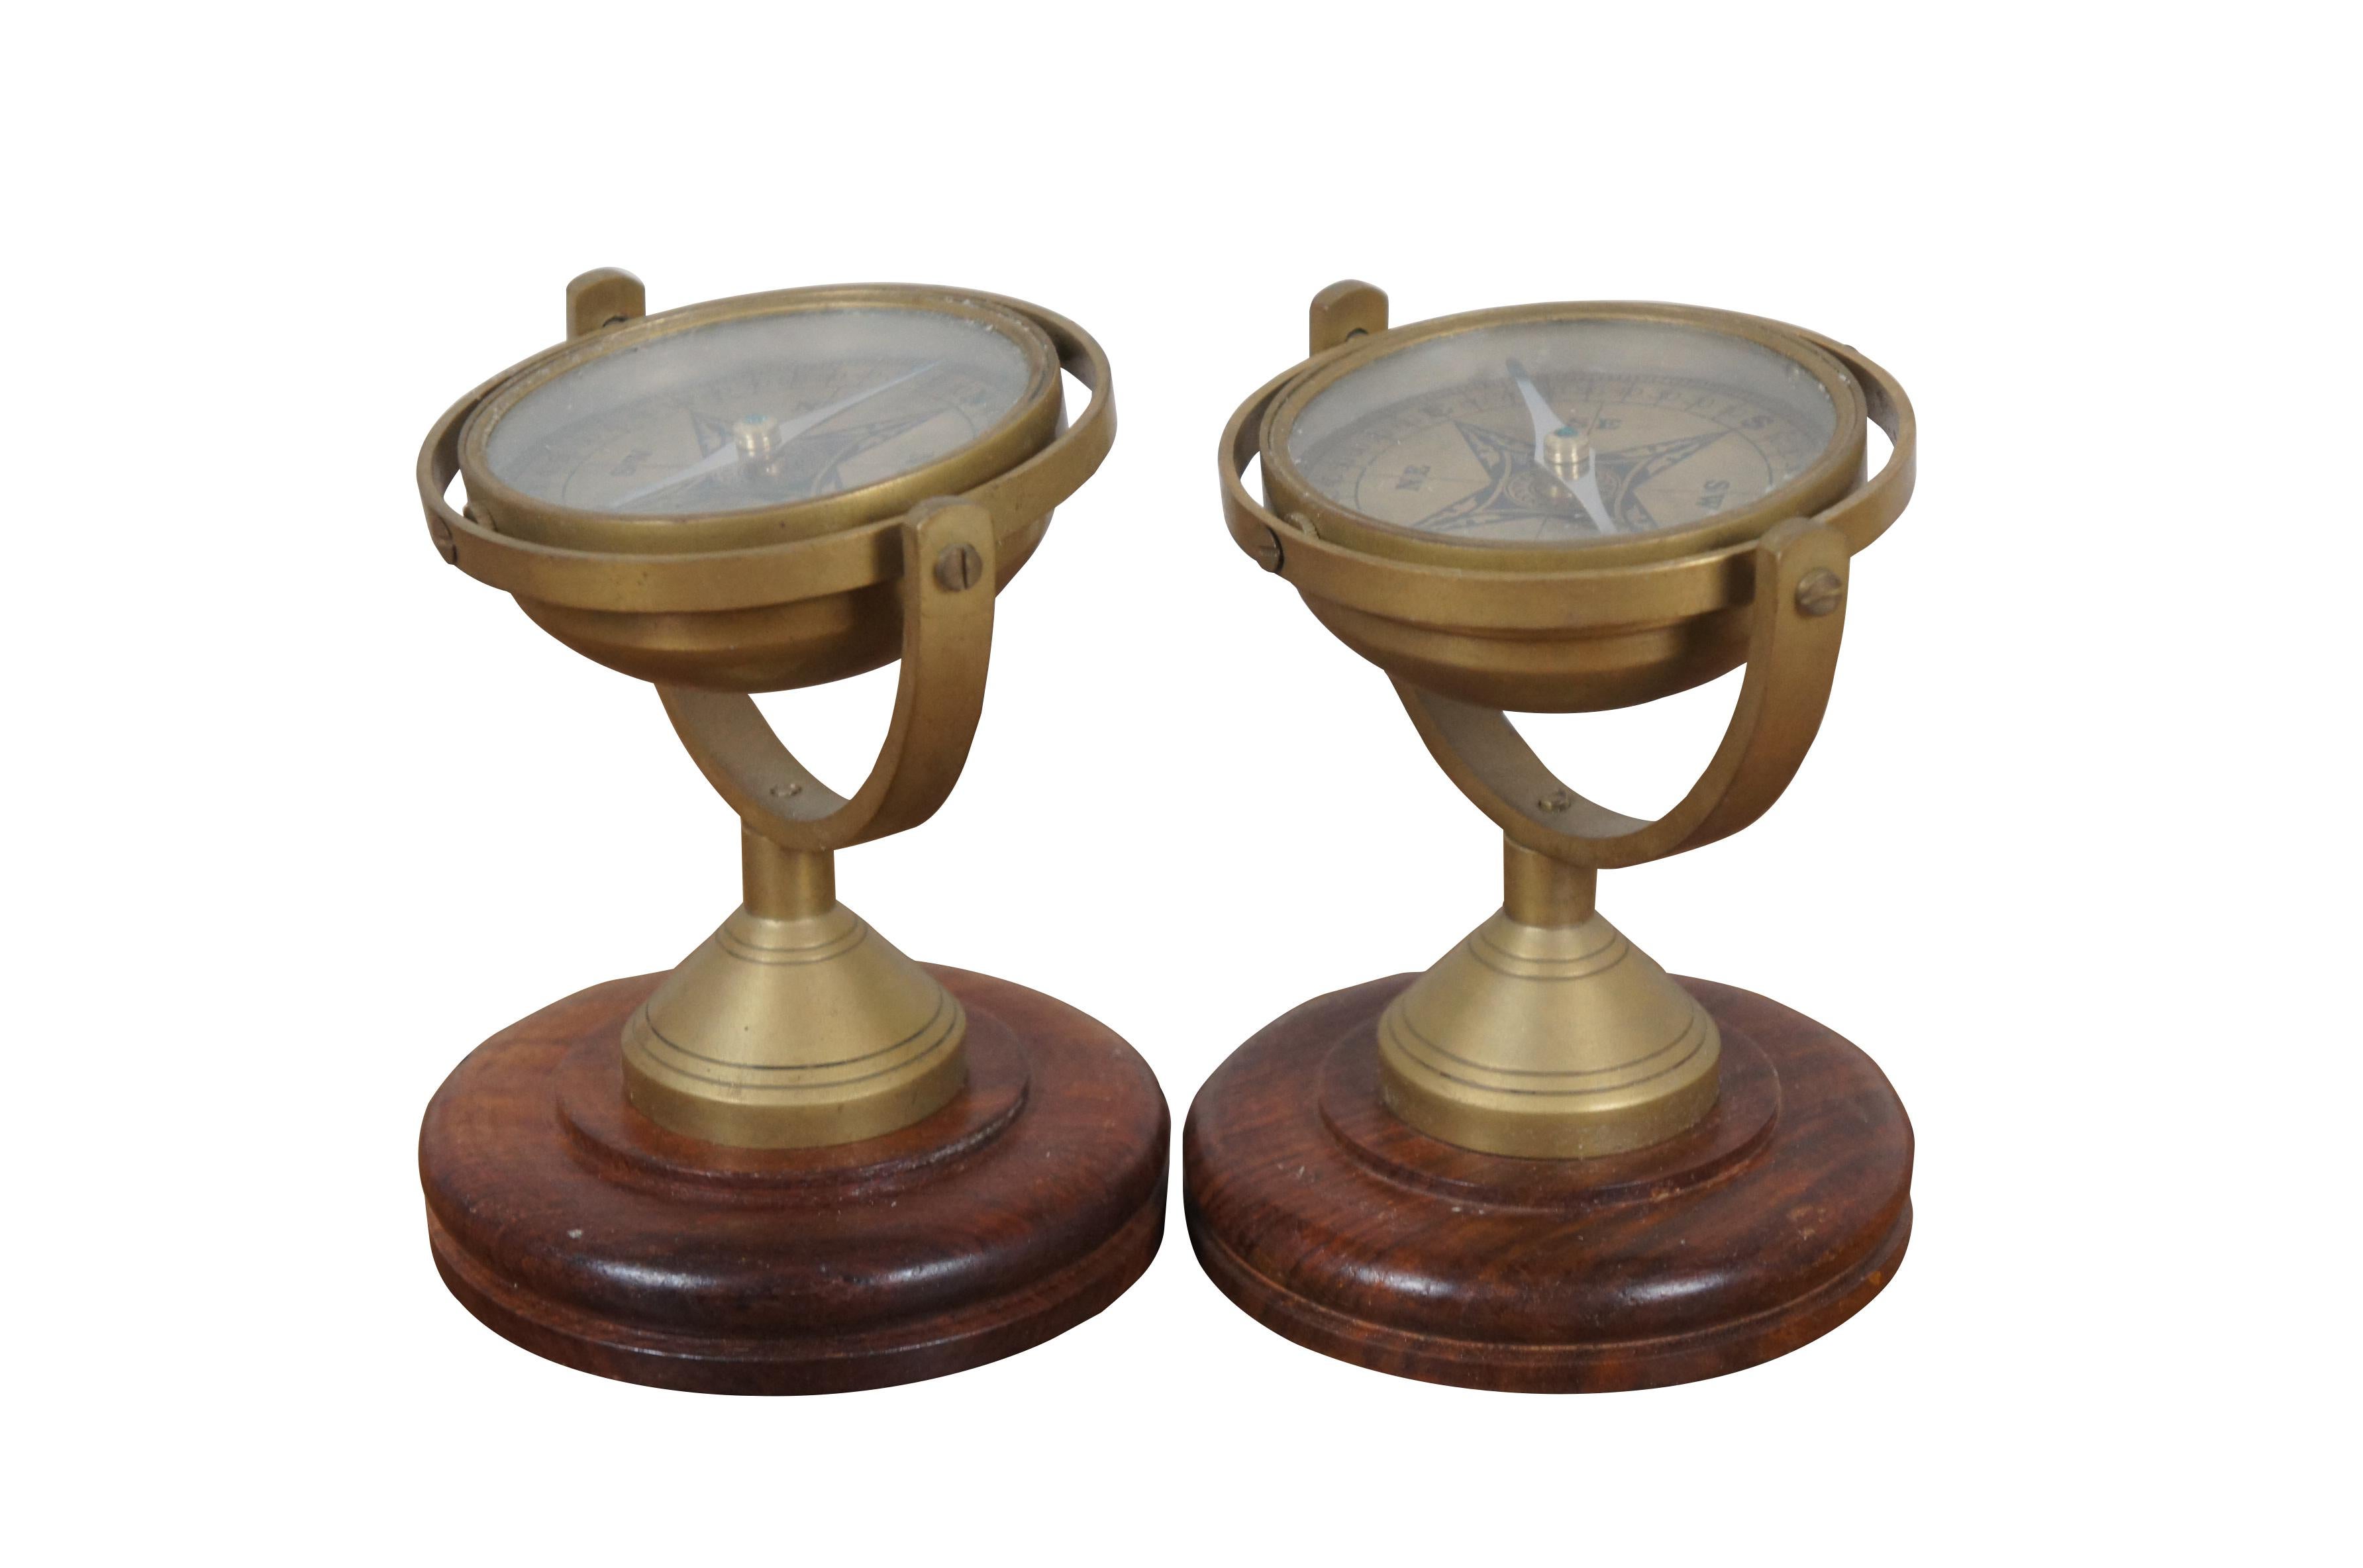 Pair of late 20th century free standing brass swiveling / gimbal nautical compasses on wood pedestal stands.

Dimensions:
4